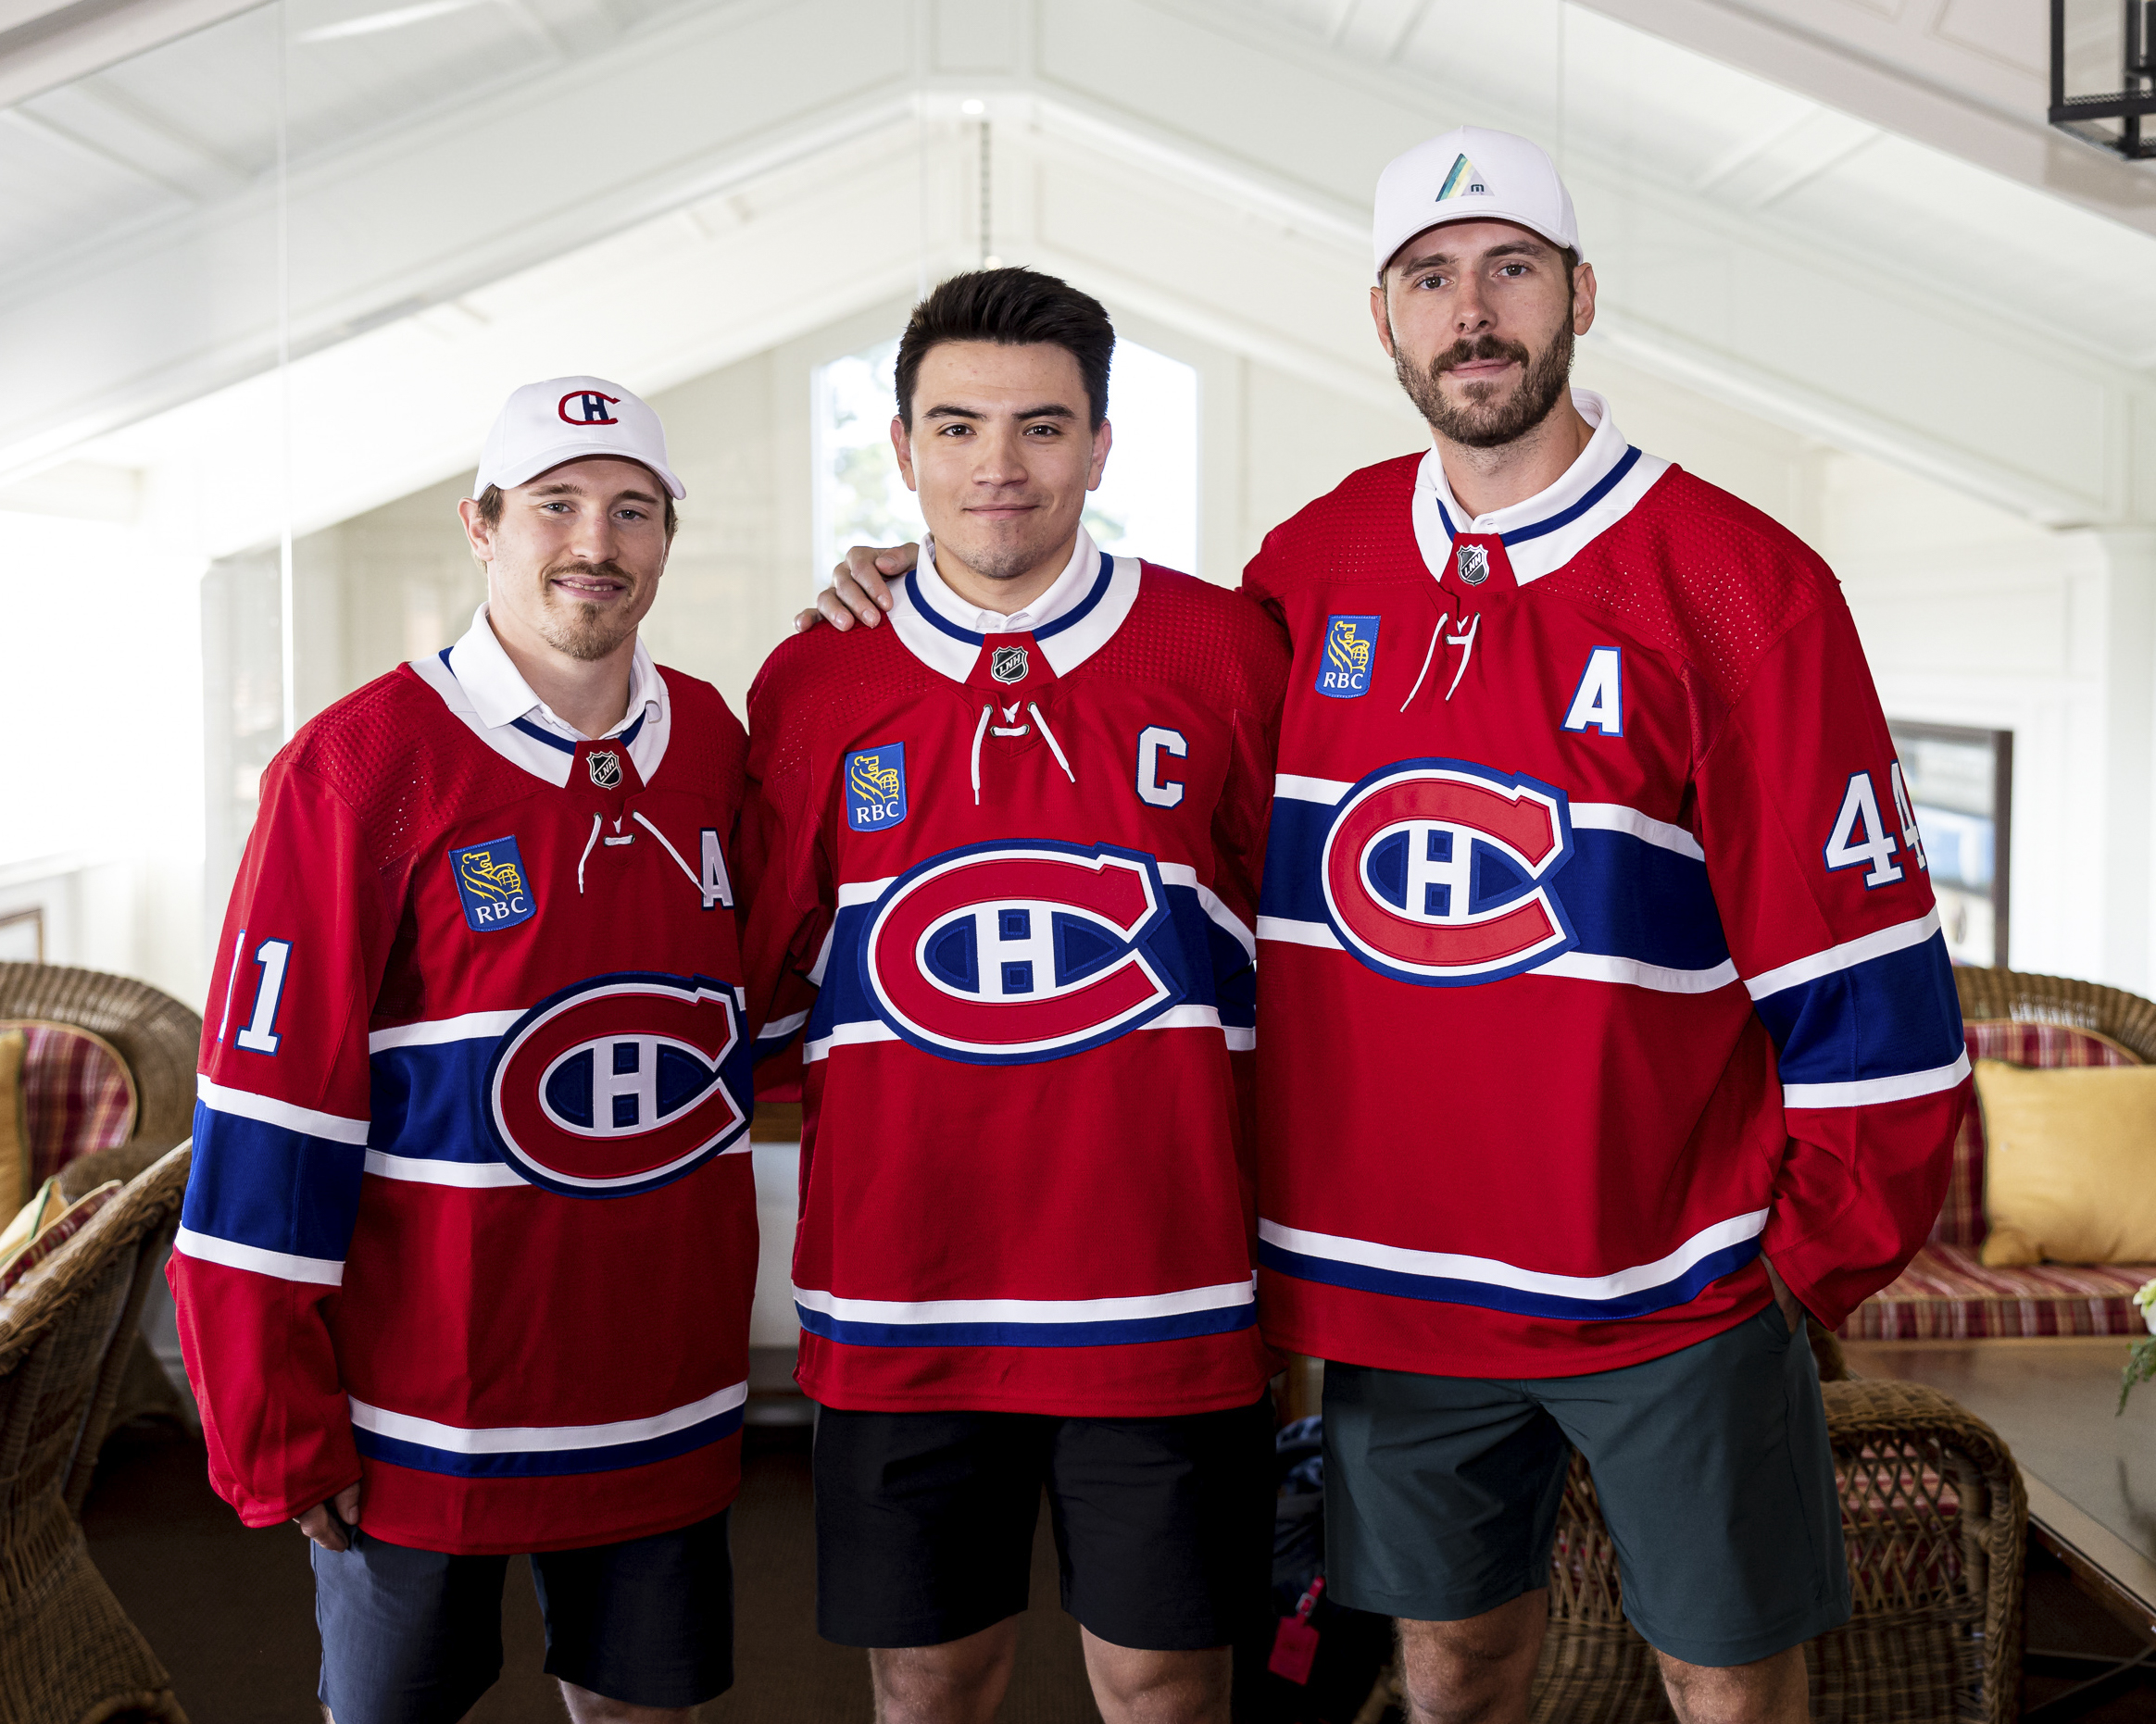 The Montreal Canadiens have a new jersey or do they?